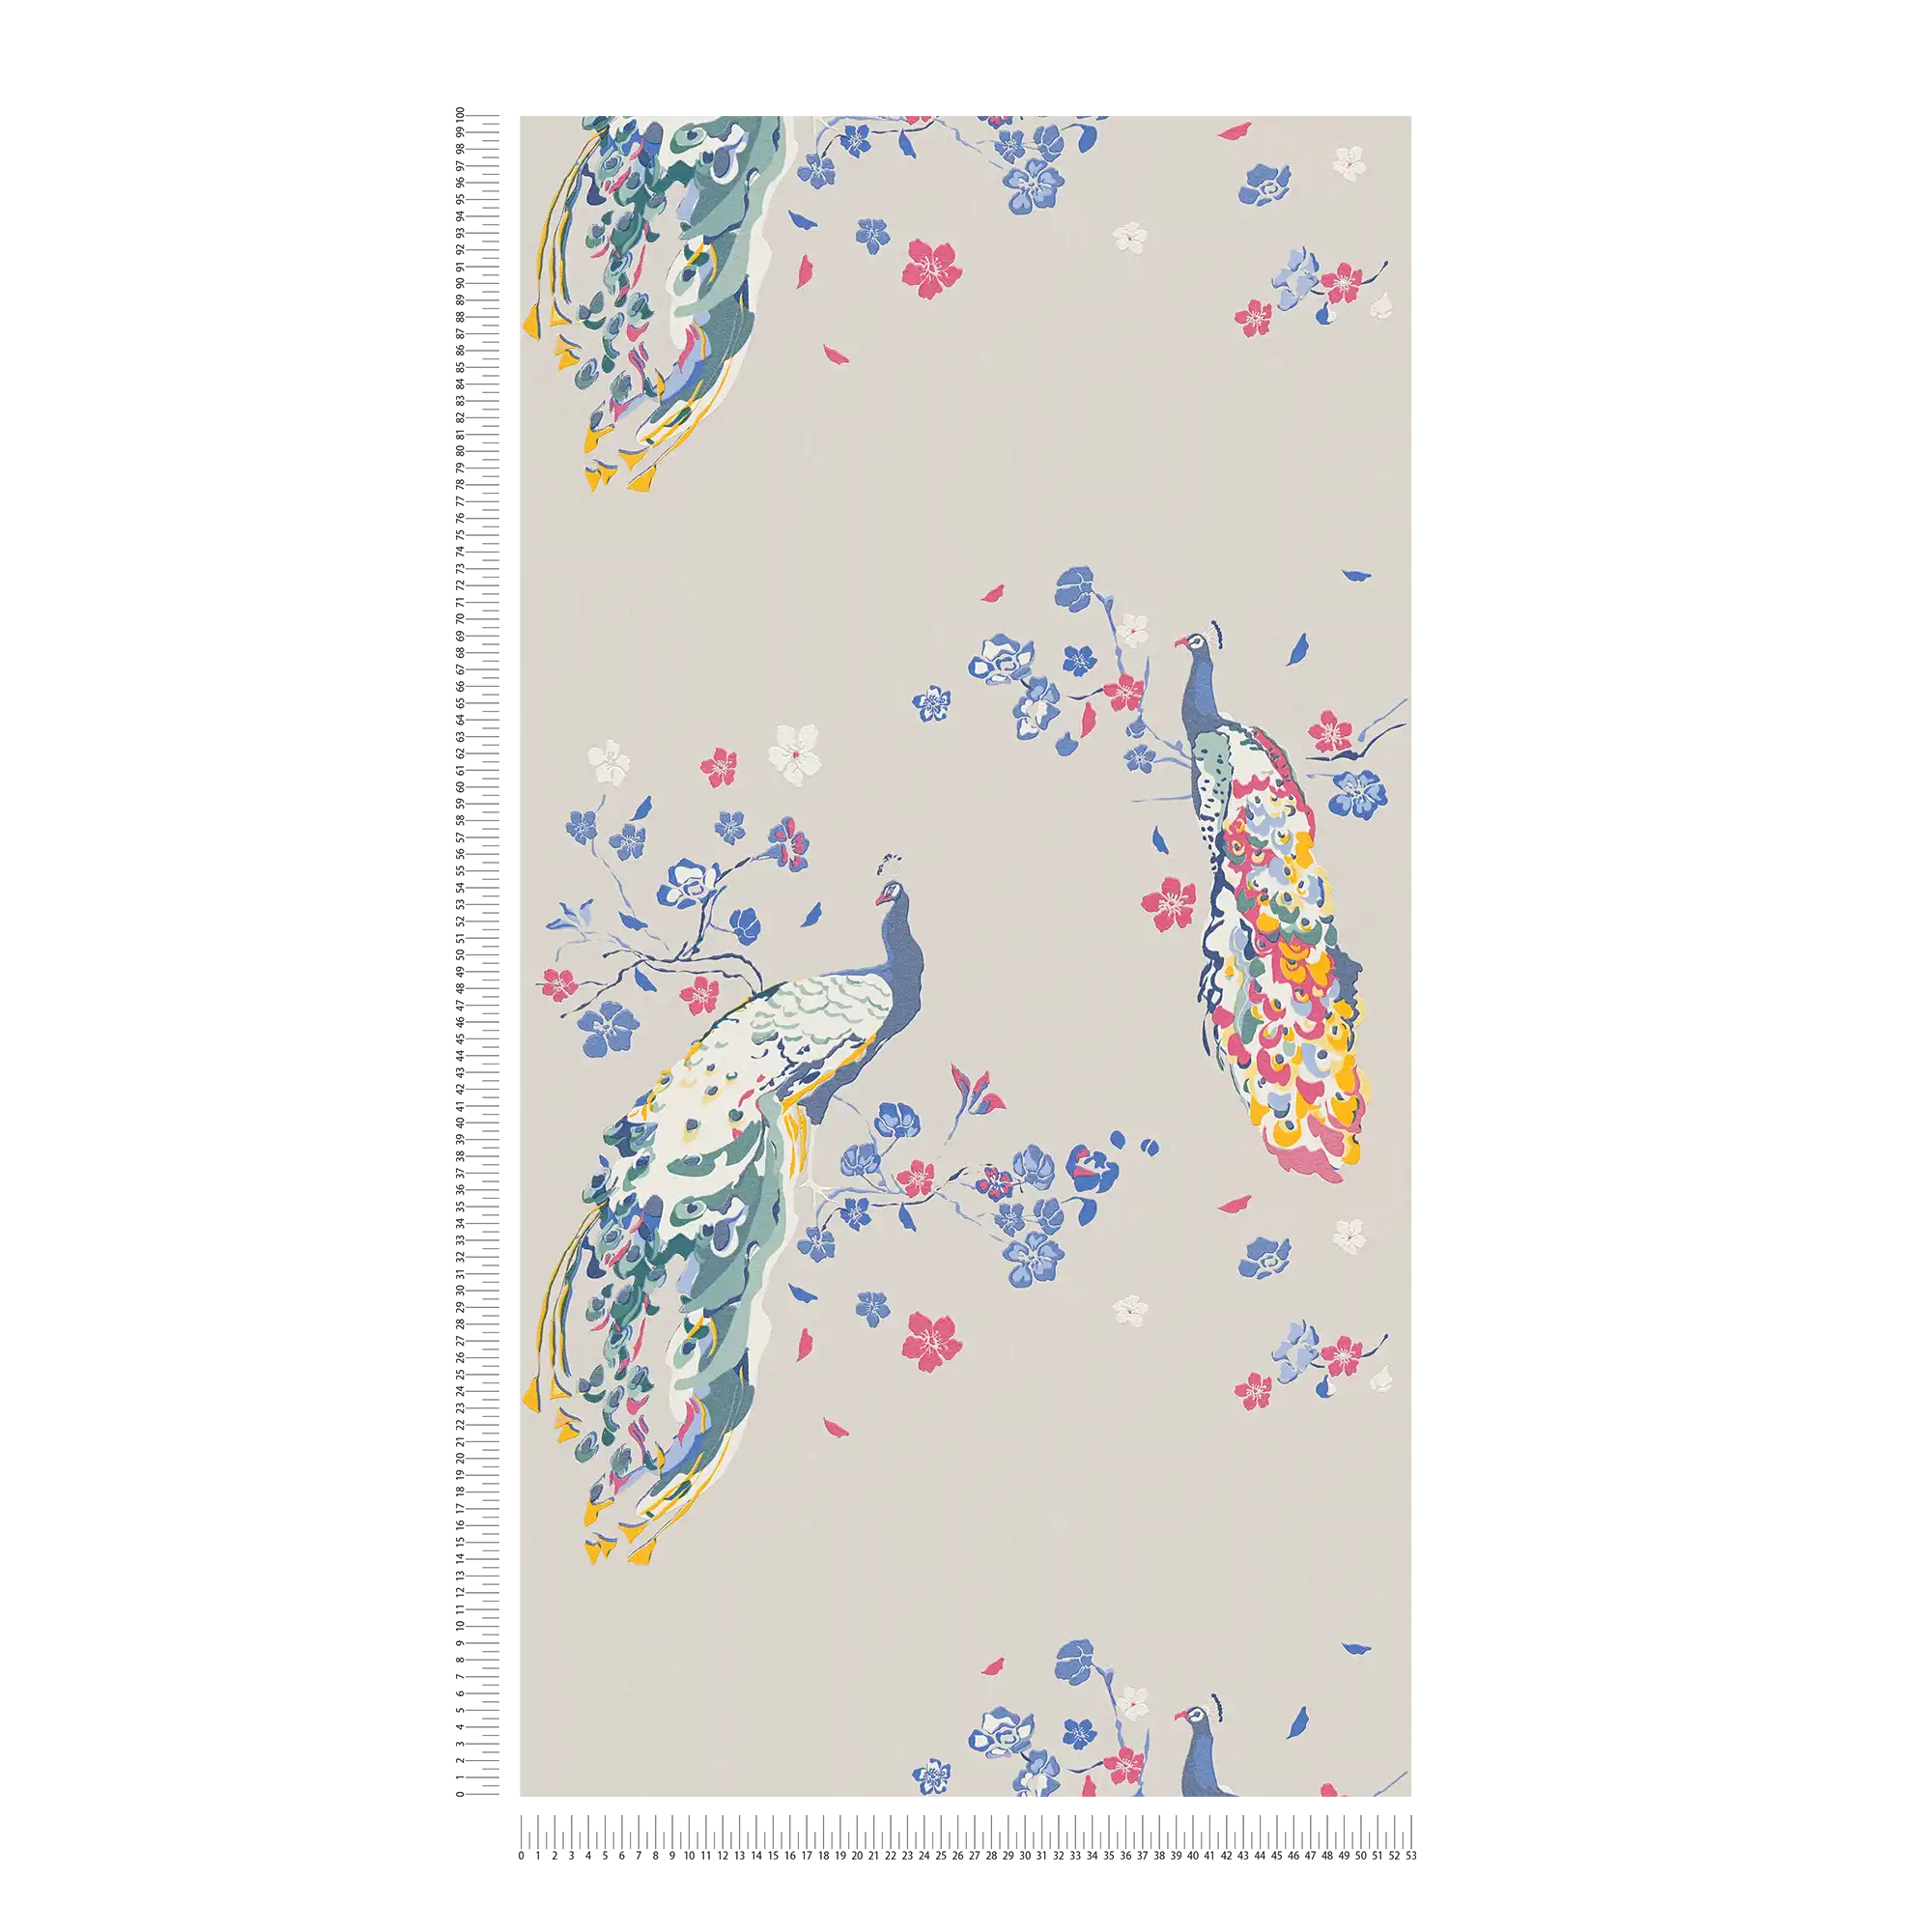             Pattern wallpaper with peacock pattern and glossy effect - beige, blue, colourful
        